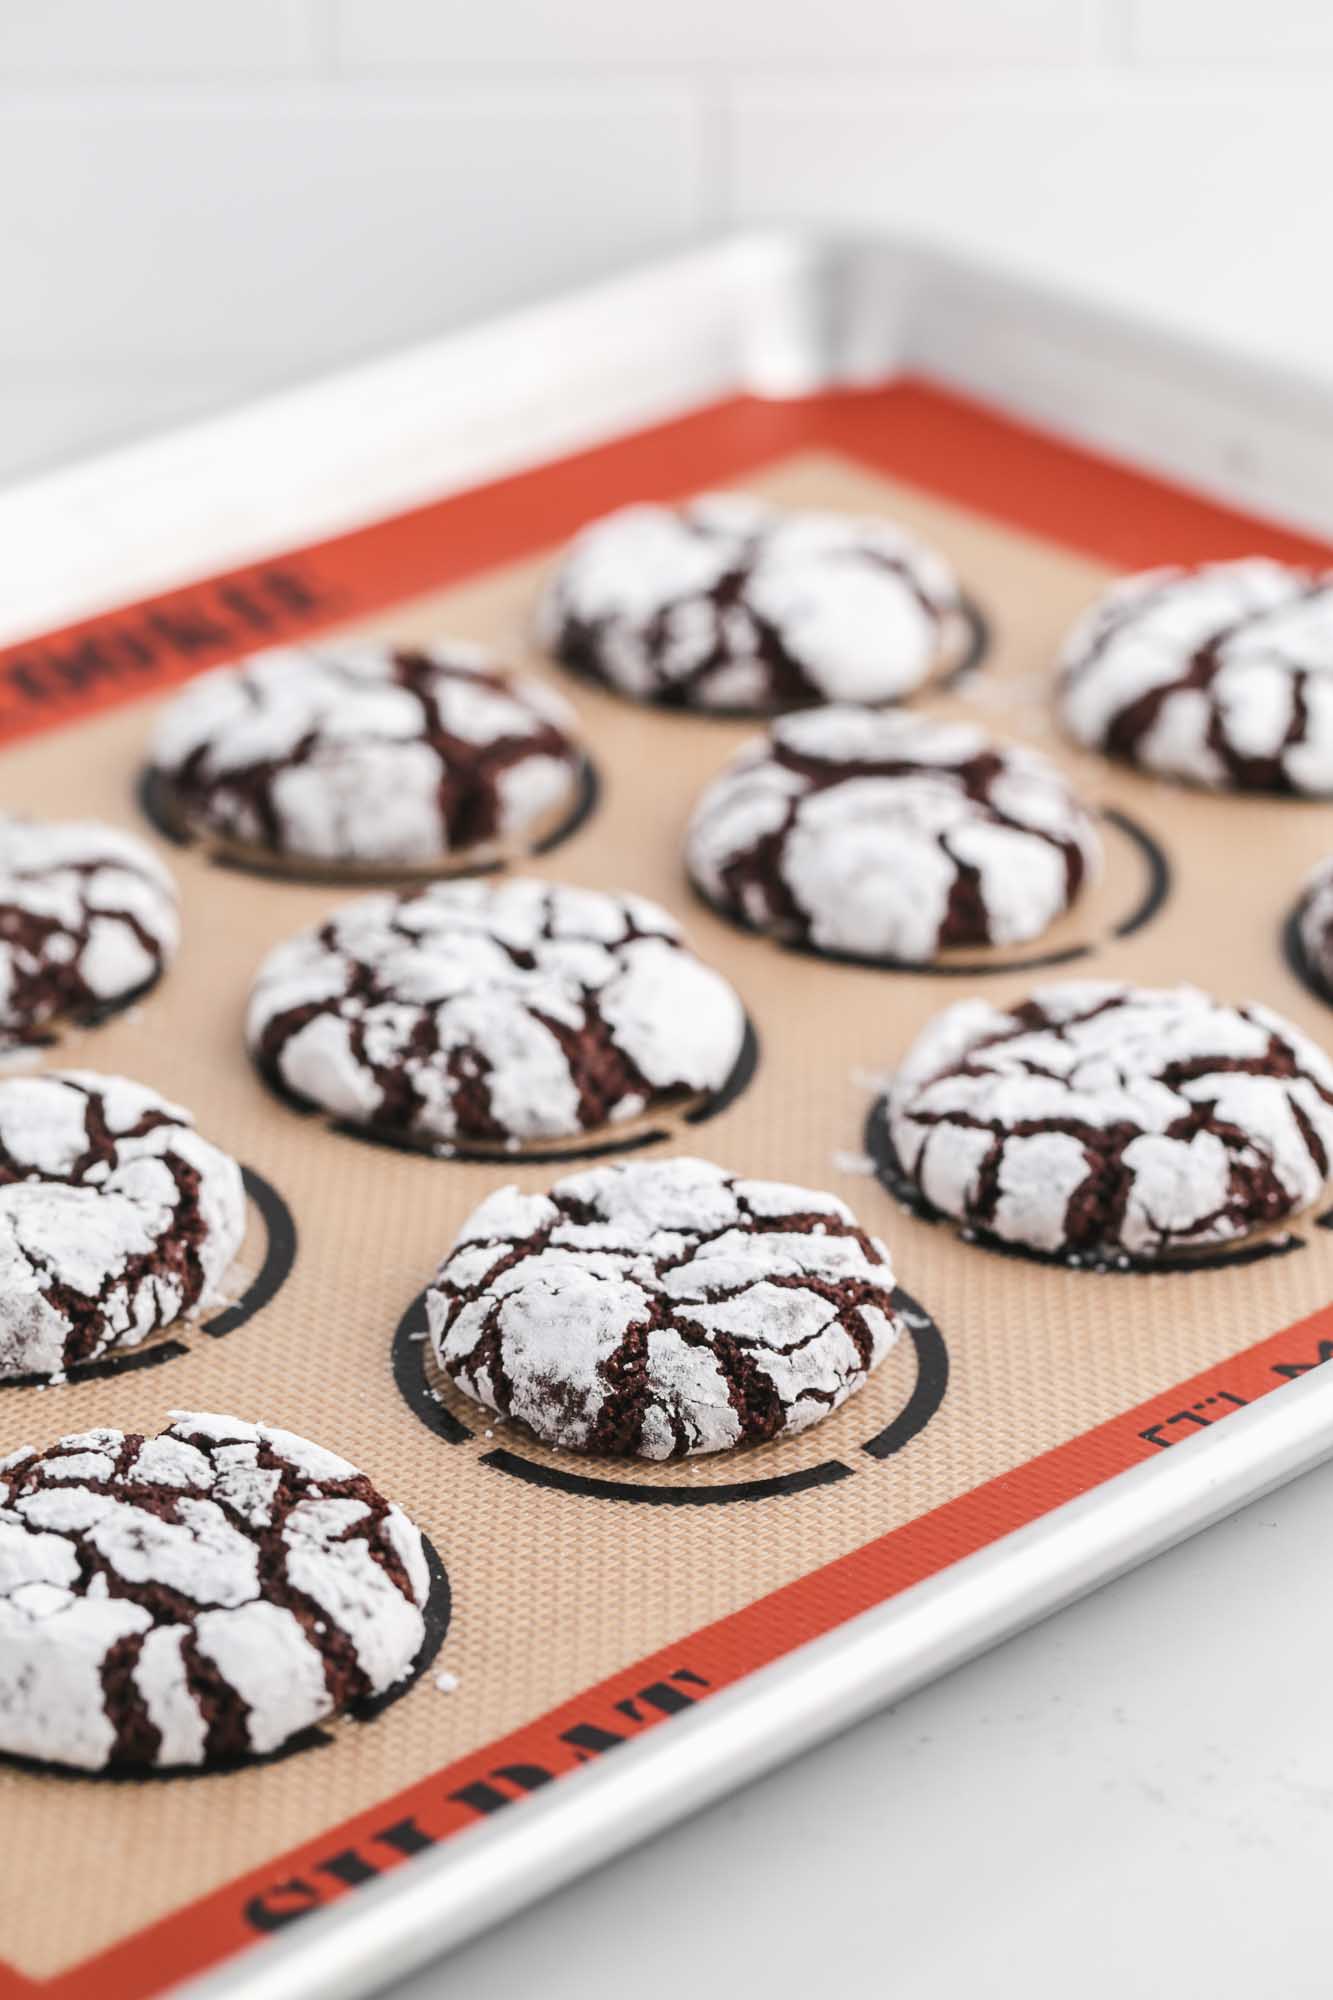 Chocolate crinkle cookies on a cookie sheet lined with Silpat mat